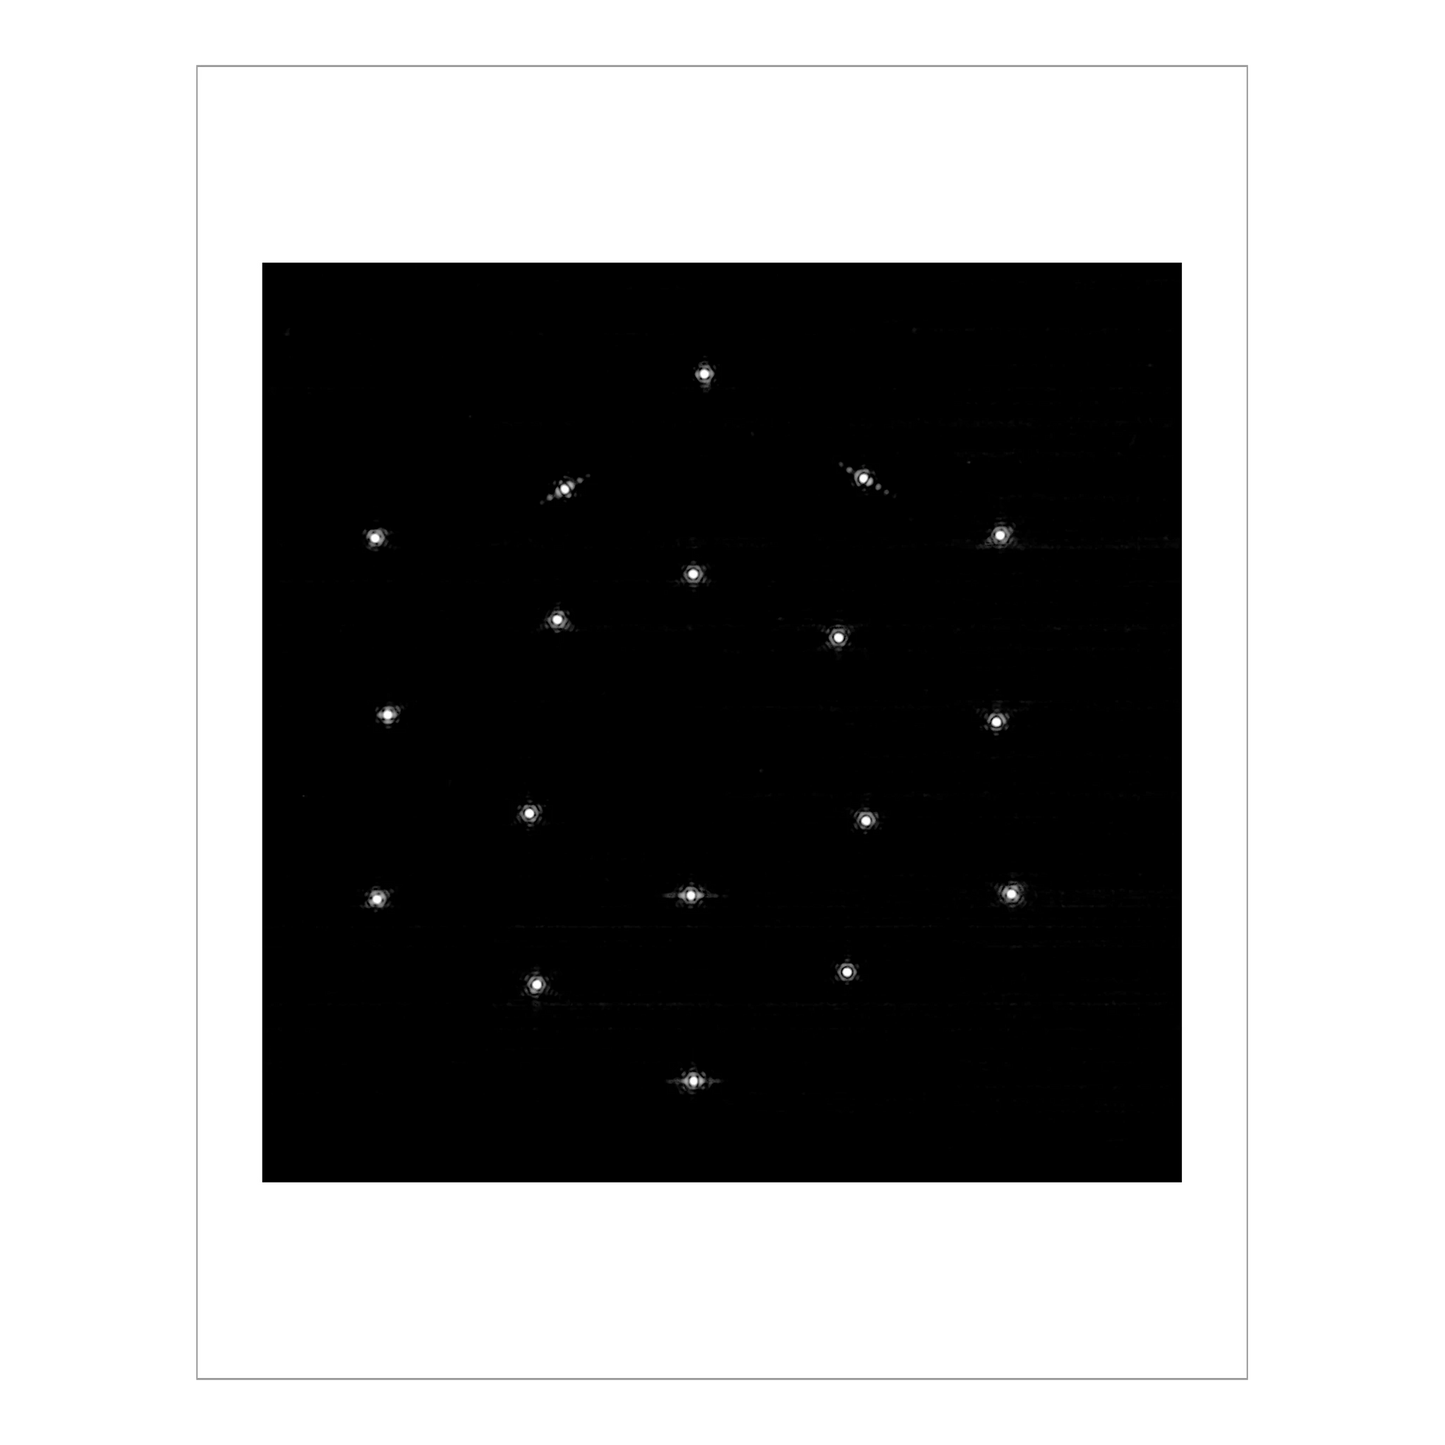 The same star repeated 18 times, once for each of the Webb’s mirrors, into a hexagonal formation.